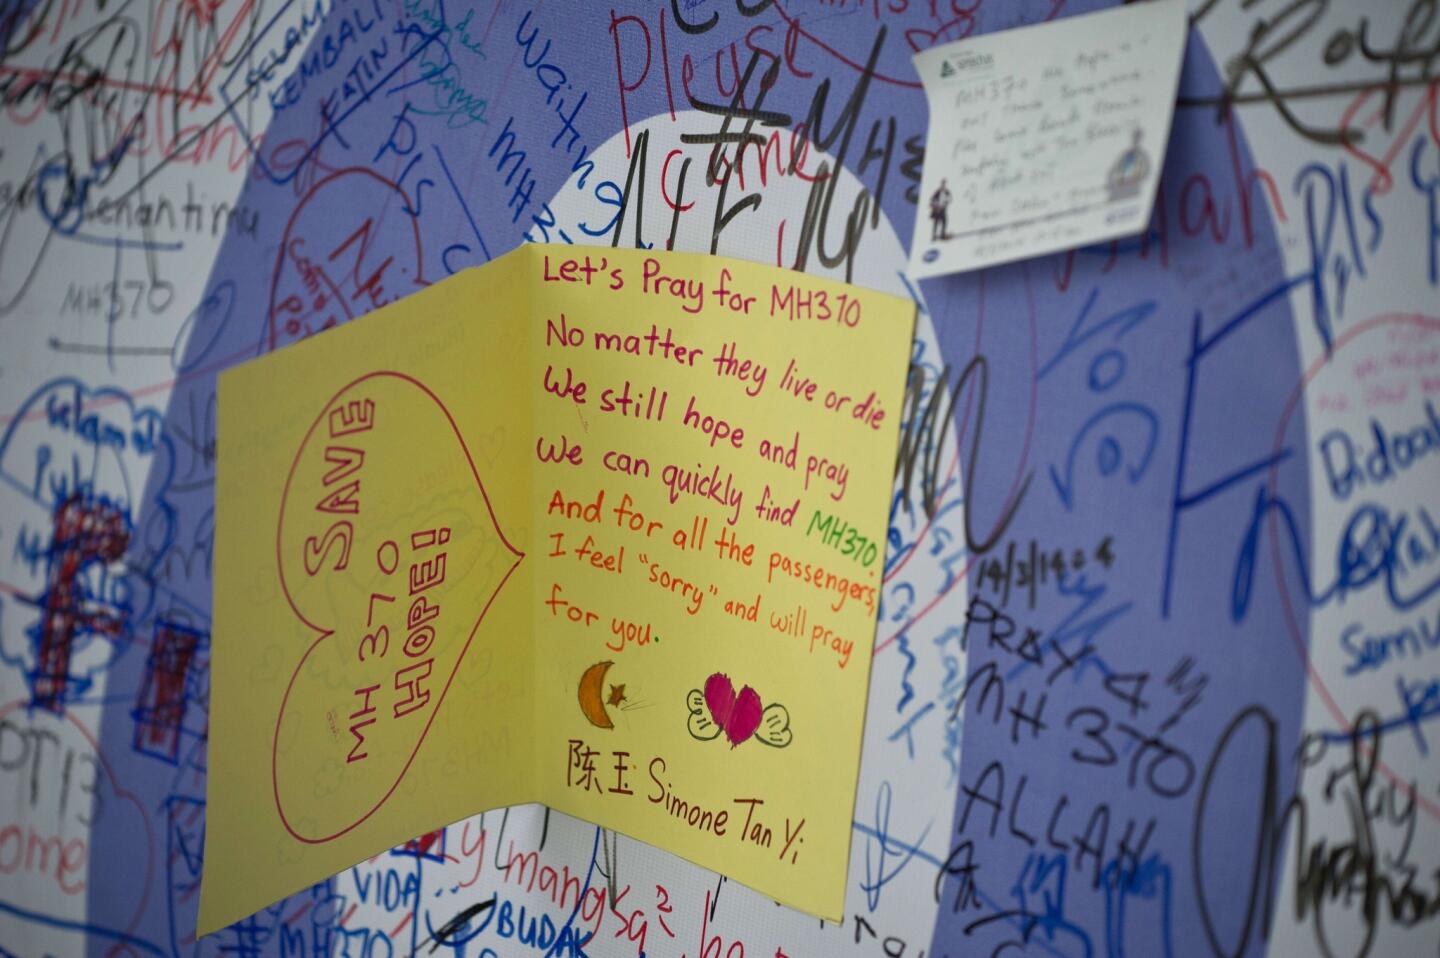 Messages for the passengers of missing Malaysia Airlines flight MH370 are posted on a wall display at Kuala Lumpur International Airport (KLIA) in Sepang, outside Kuala Lumpur on March 18, 2014.